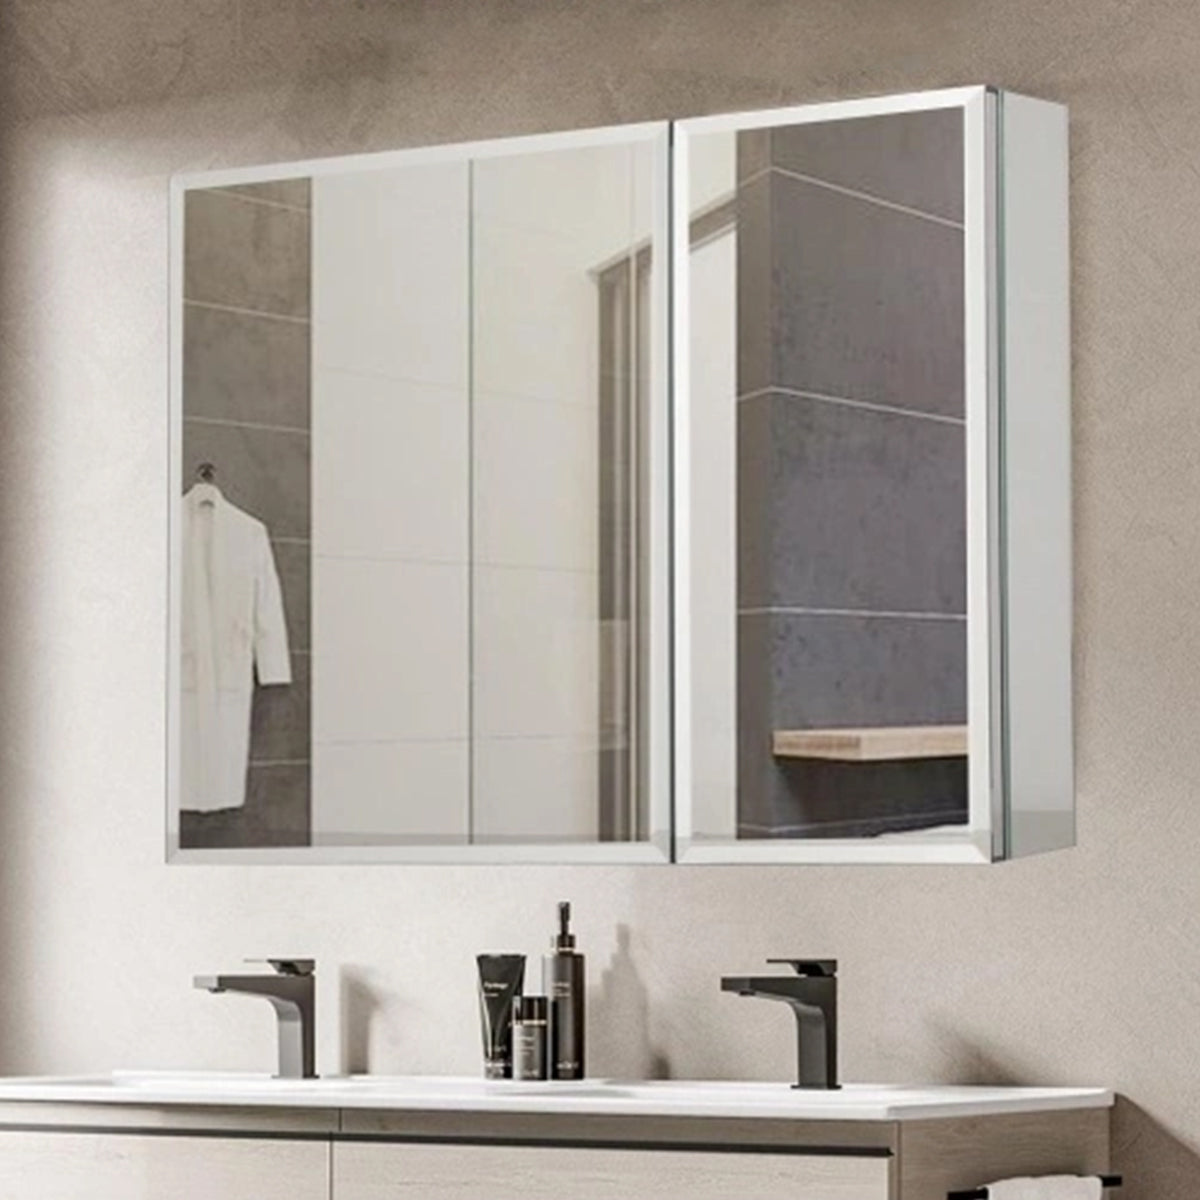 36 in. x 26 in. Frameless Medicine Cabinet with Mirror, Recessed or Surface-Mount, Double Sided Mirror, 3 Doors 3-Adjustable Shelves, Soft-Closing, Mirror Cabinet for Bathroom, Bedroom, Hotel